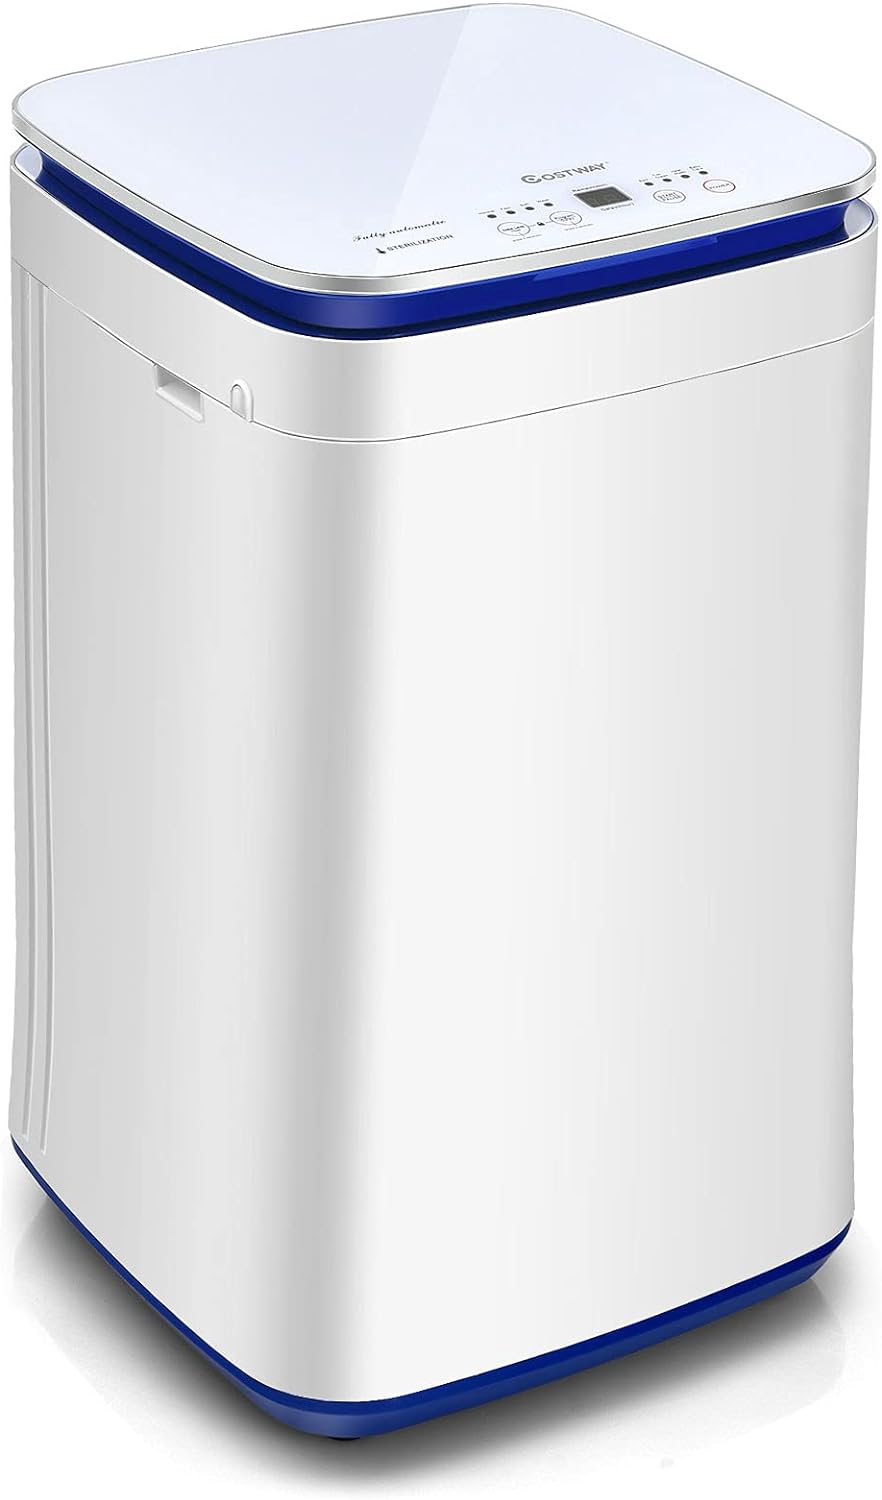 COSTWAY Full Automatic Washing Machine, 7.7Lbs Capacity, 8 Programs, 2-in-1 Portable Washer and Spinner with 24 Hours Delay, 3 Heating Function, Laundry Washer with Drain Pump for Apartment, RV